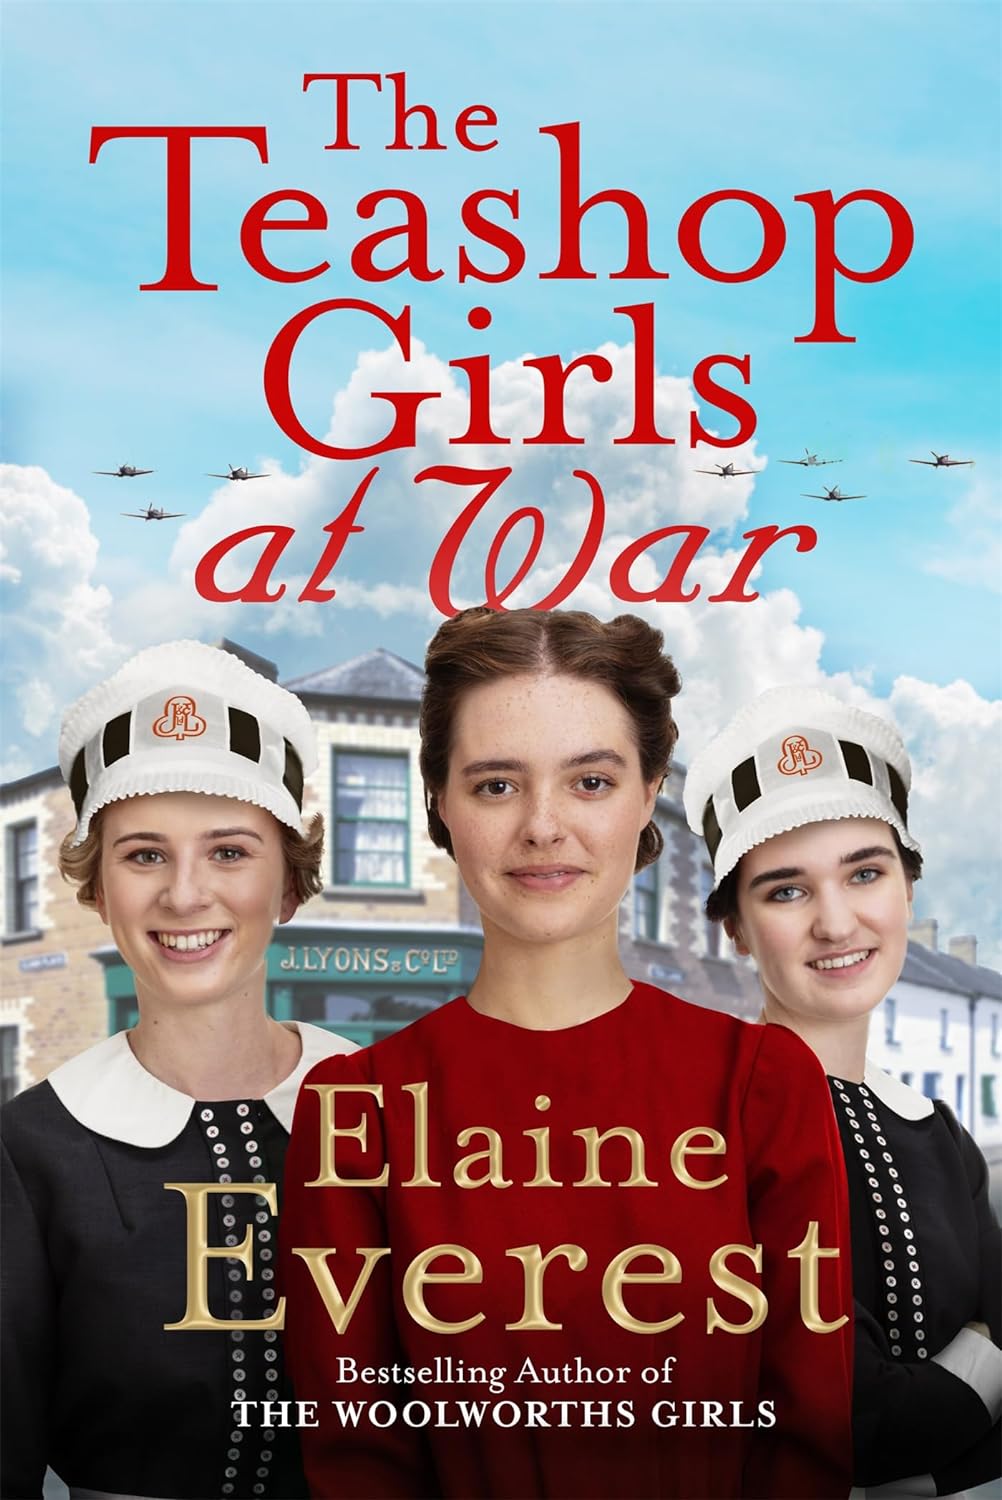 The_Teashop_girls_at_war_book_cover